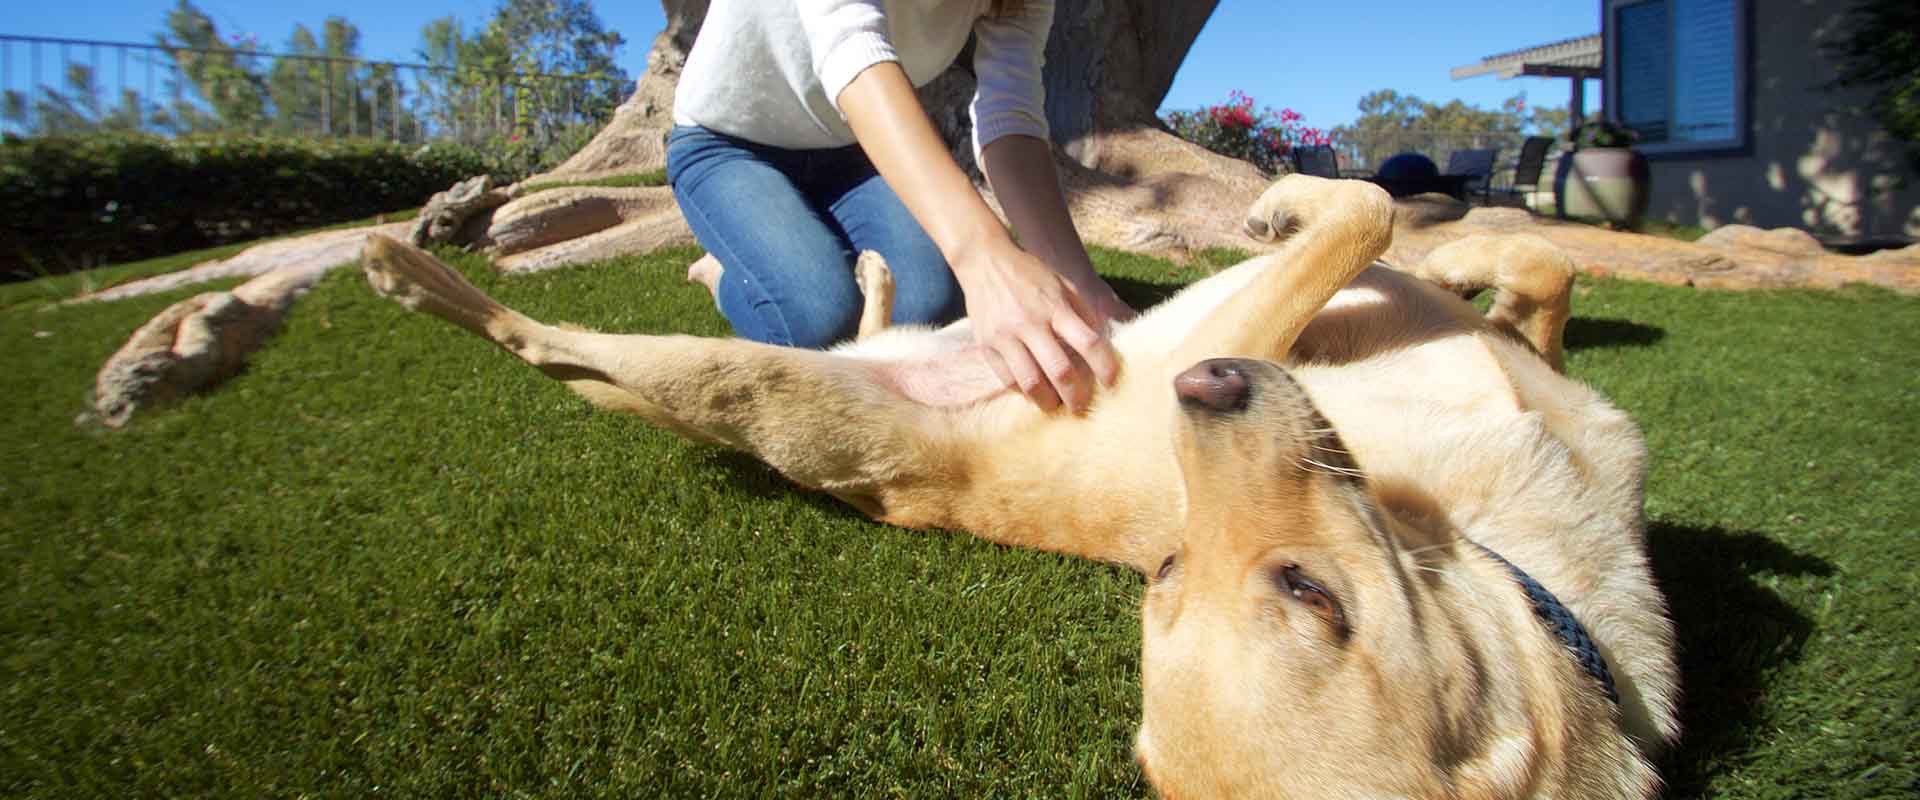 Backyard Pet Safe artificial grass for your dog and family by SYNLawn of Georgia